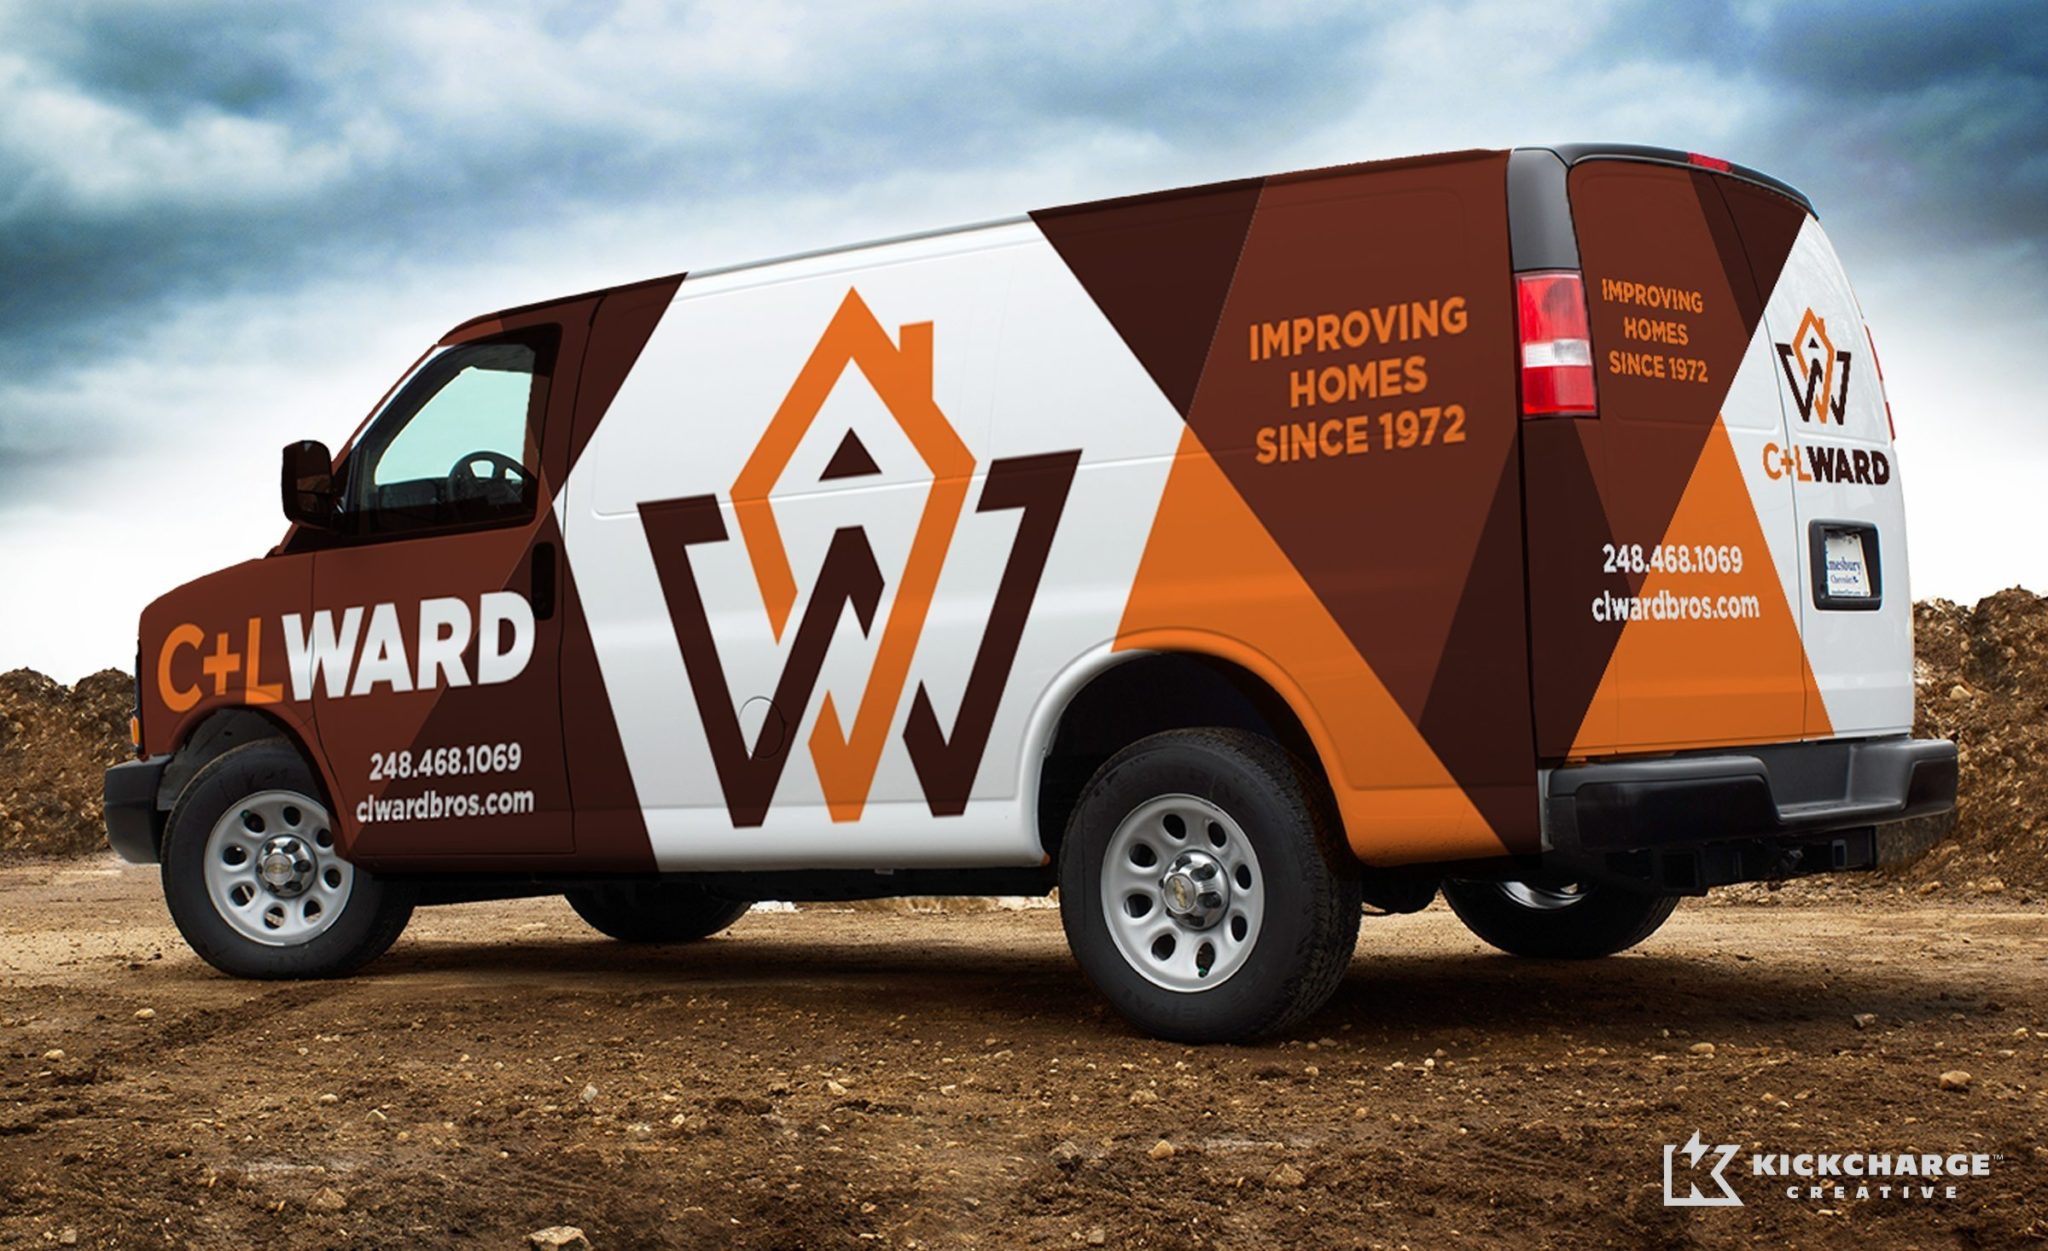 Proposed fleet branding for a home remodeling company.